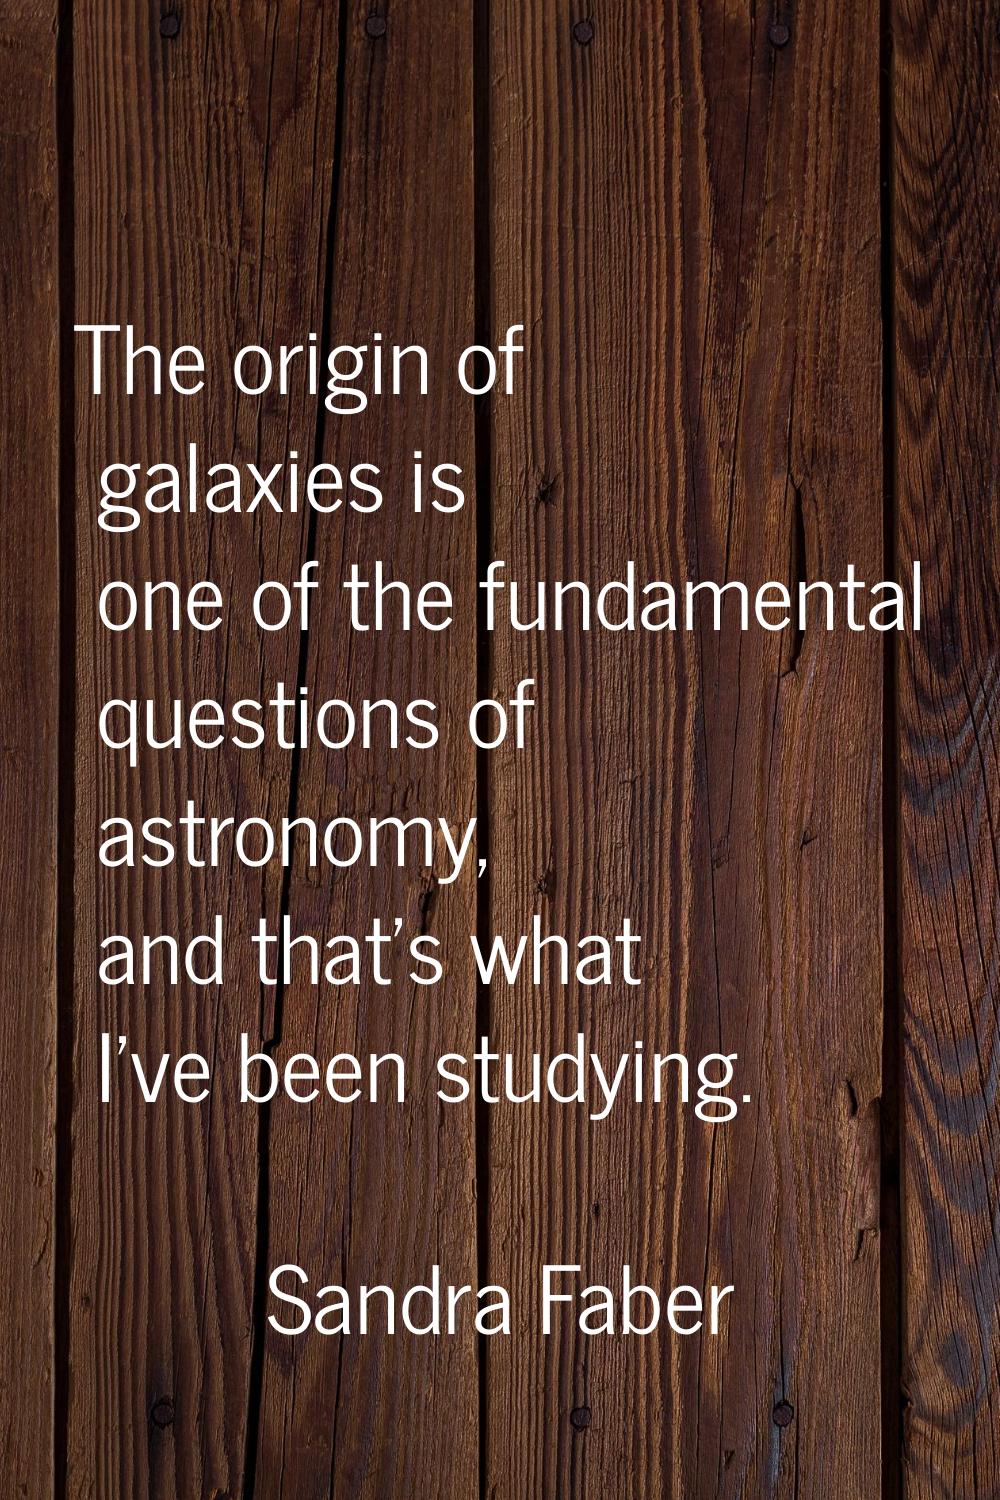 The origin of galaxies is one of the fundamental questions of astronomy, and that's what I've been 